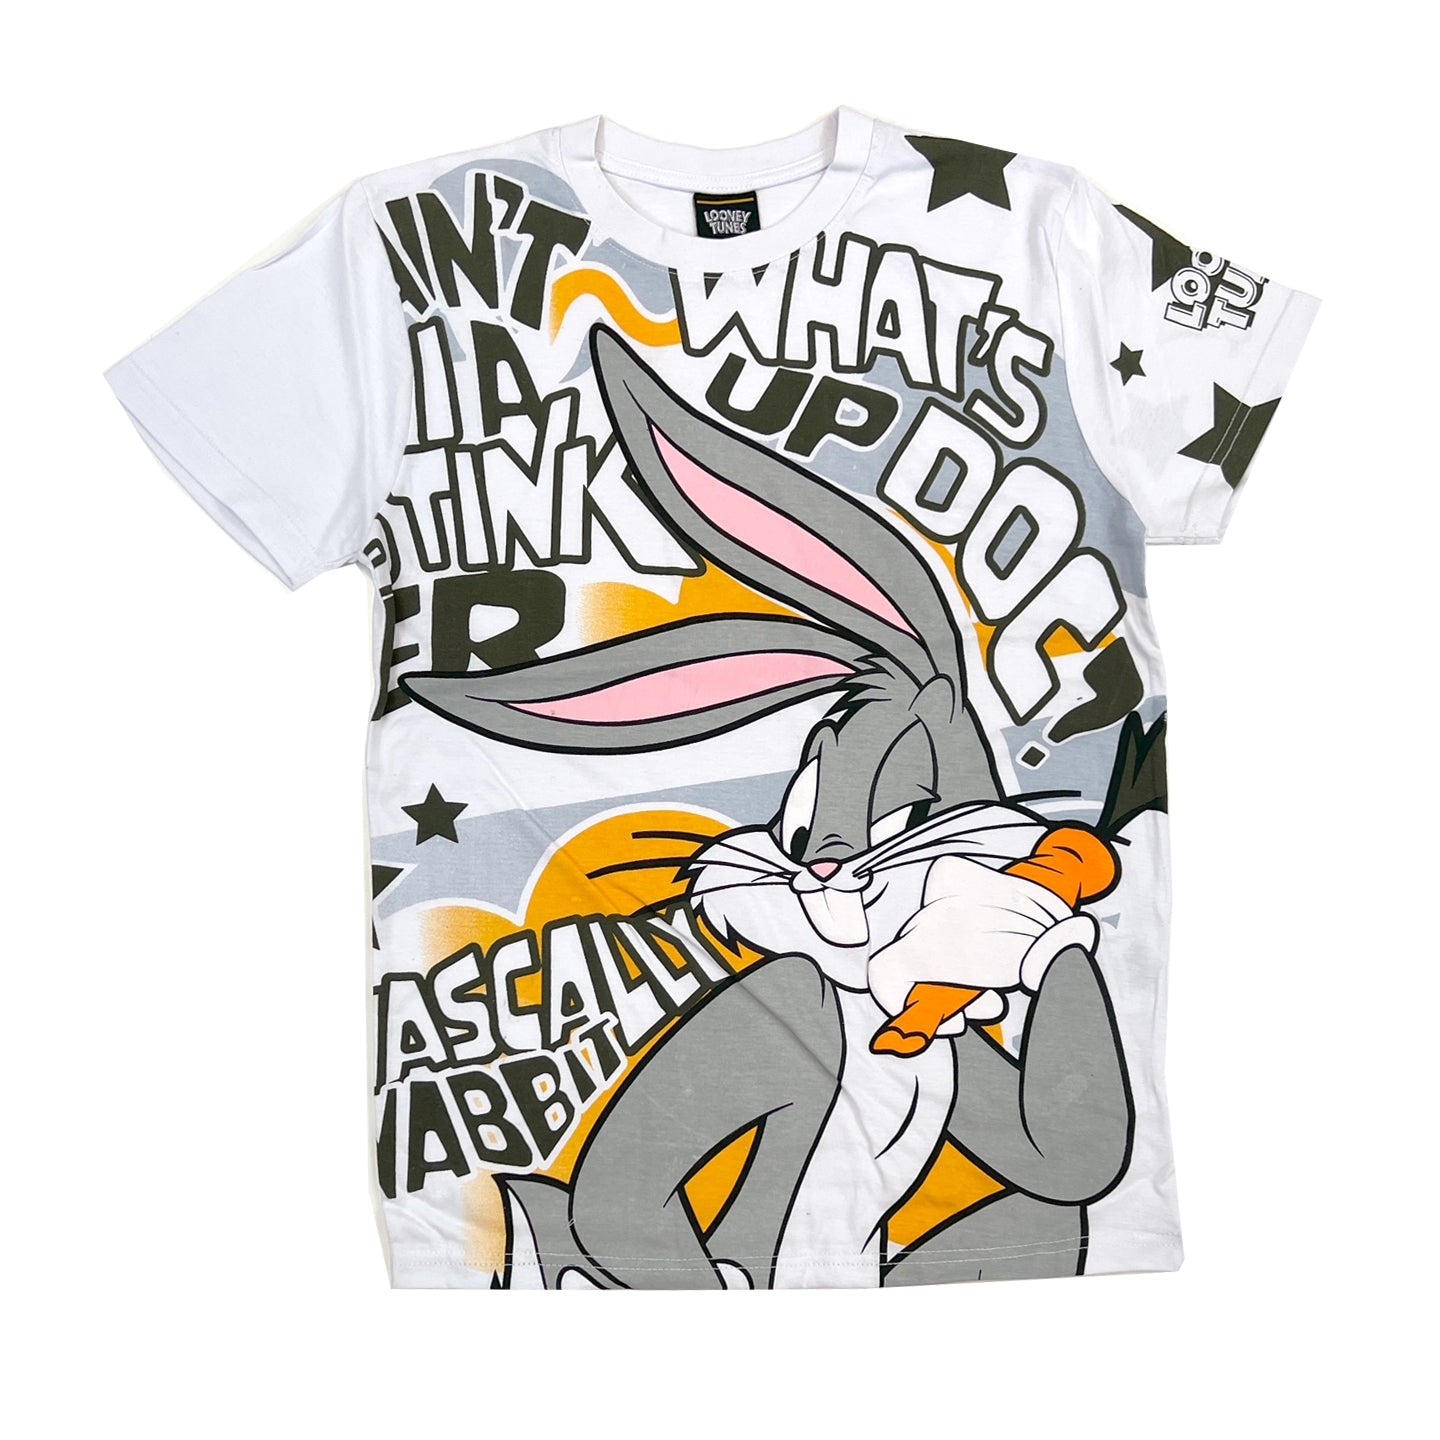 Looney Tunes $30 for 2 Bugs / $16.99 Tee Bunny (White)